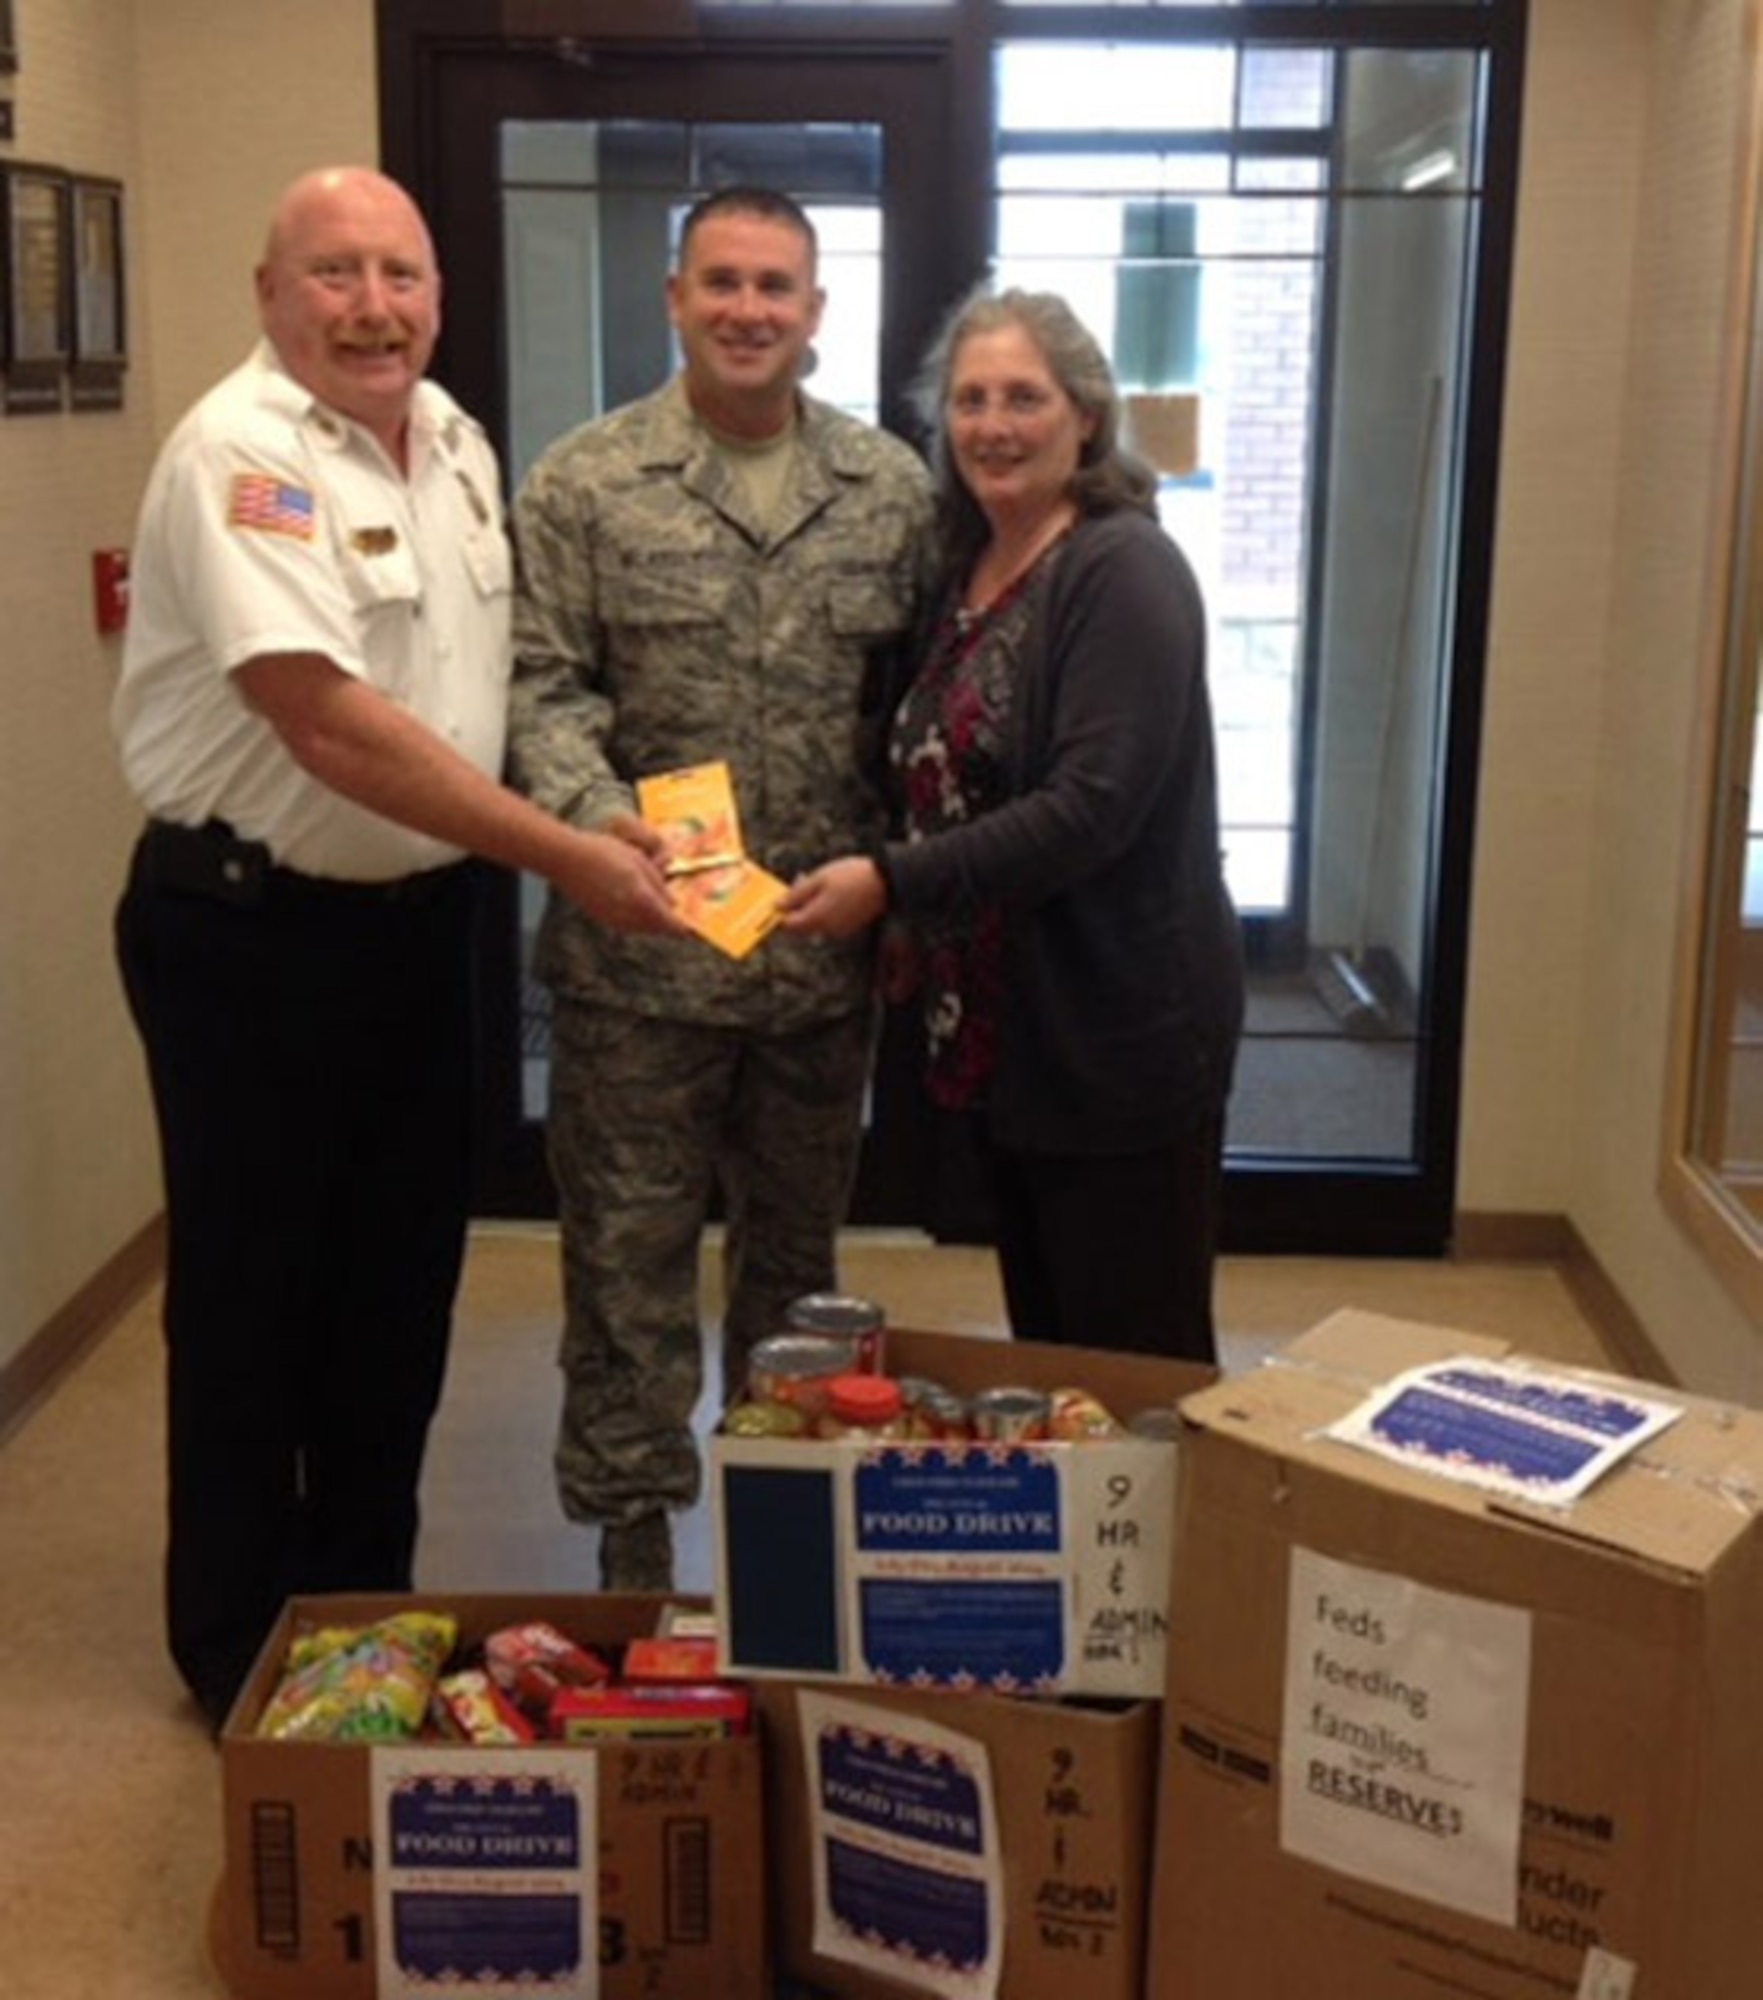 (From left) Niagara Falls Air Reserve Station Fire Department Members Chief Richard Kennerson, Senior Master Sgt. Aaron McArdle and Felecia Redden stand with two local supermarket gift cards and food for donation to the Heart, Love and Soul Inc. Food Pantry and Dining Room located in Niagara Falls, New York on September 5, 2014. While members from different units across the Wing contributed to the cause, the Fire and Emergency Services donated the most food. This outcome was due to a friendly competition within the ranks. (U.S. Air Force photo by Tech. Sgt. Andrew Caya)